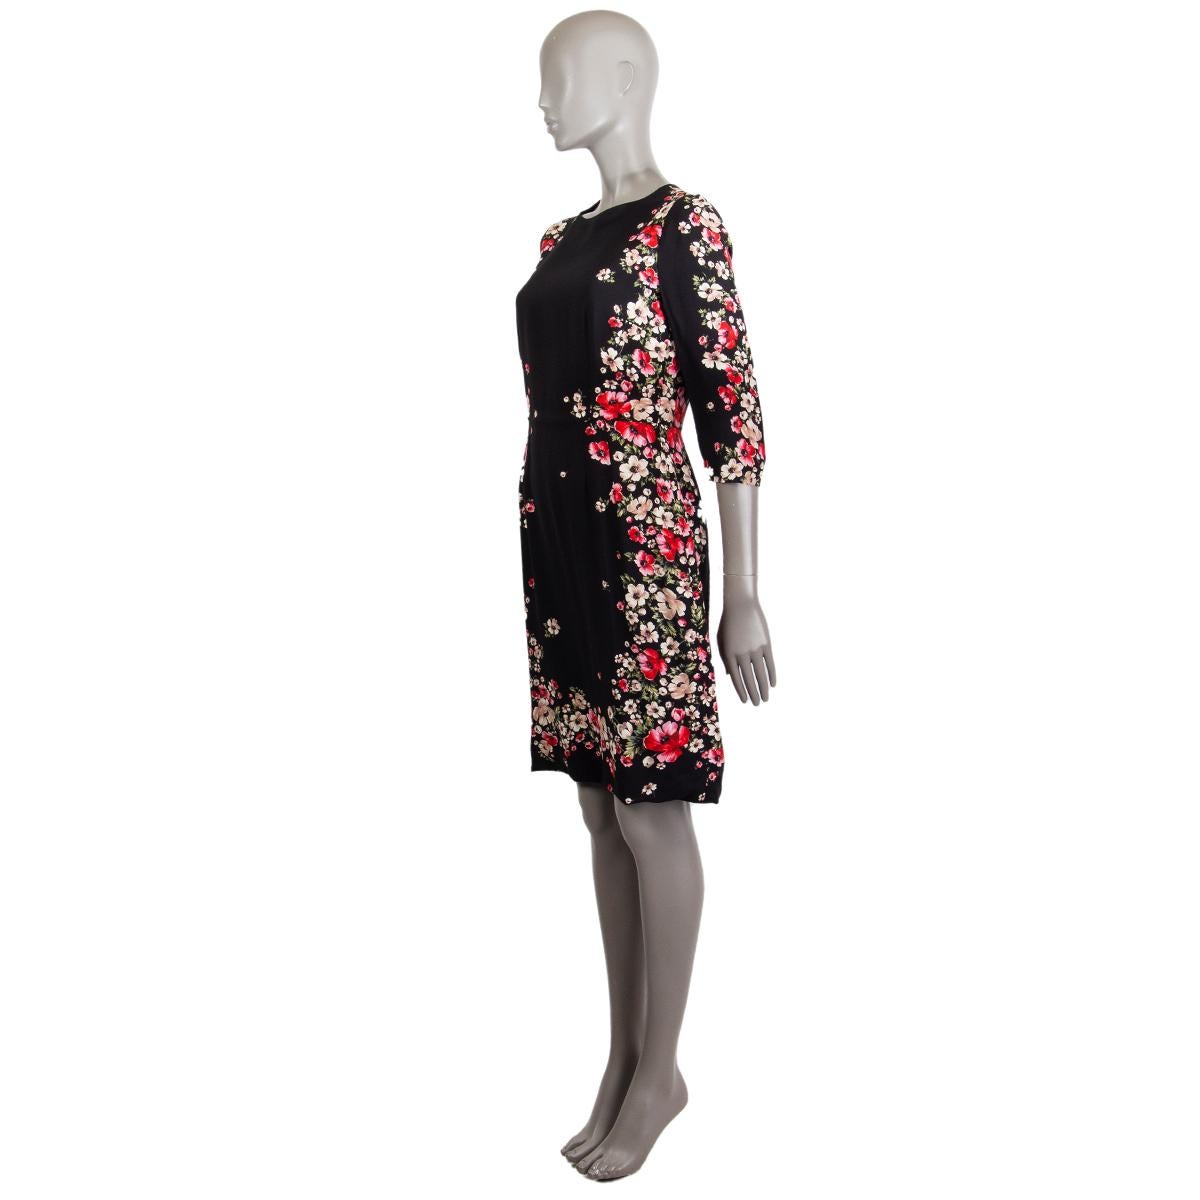 Dolce & Gabbana flower printed 3/4 sleeve sheath dress in black, red, taupe, nude and green viscose blend (missing tag). Lined in black silk (missing tag). Opens with a zipper on the back. Has been worn and is in excellent condition.

Tag Size